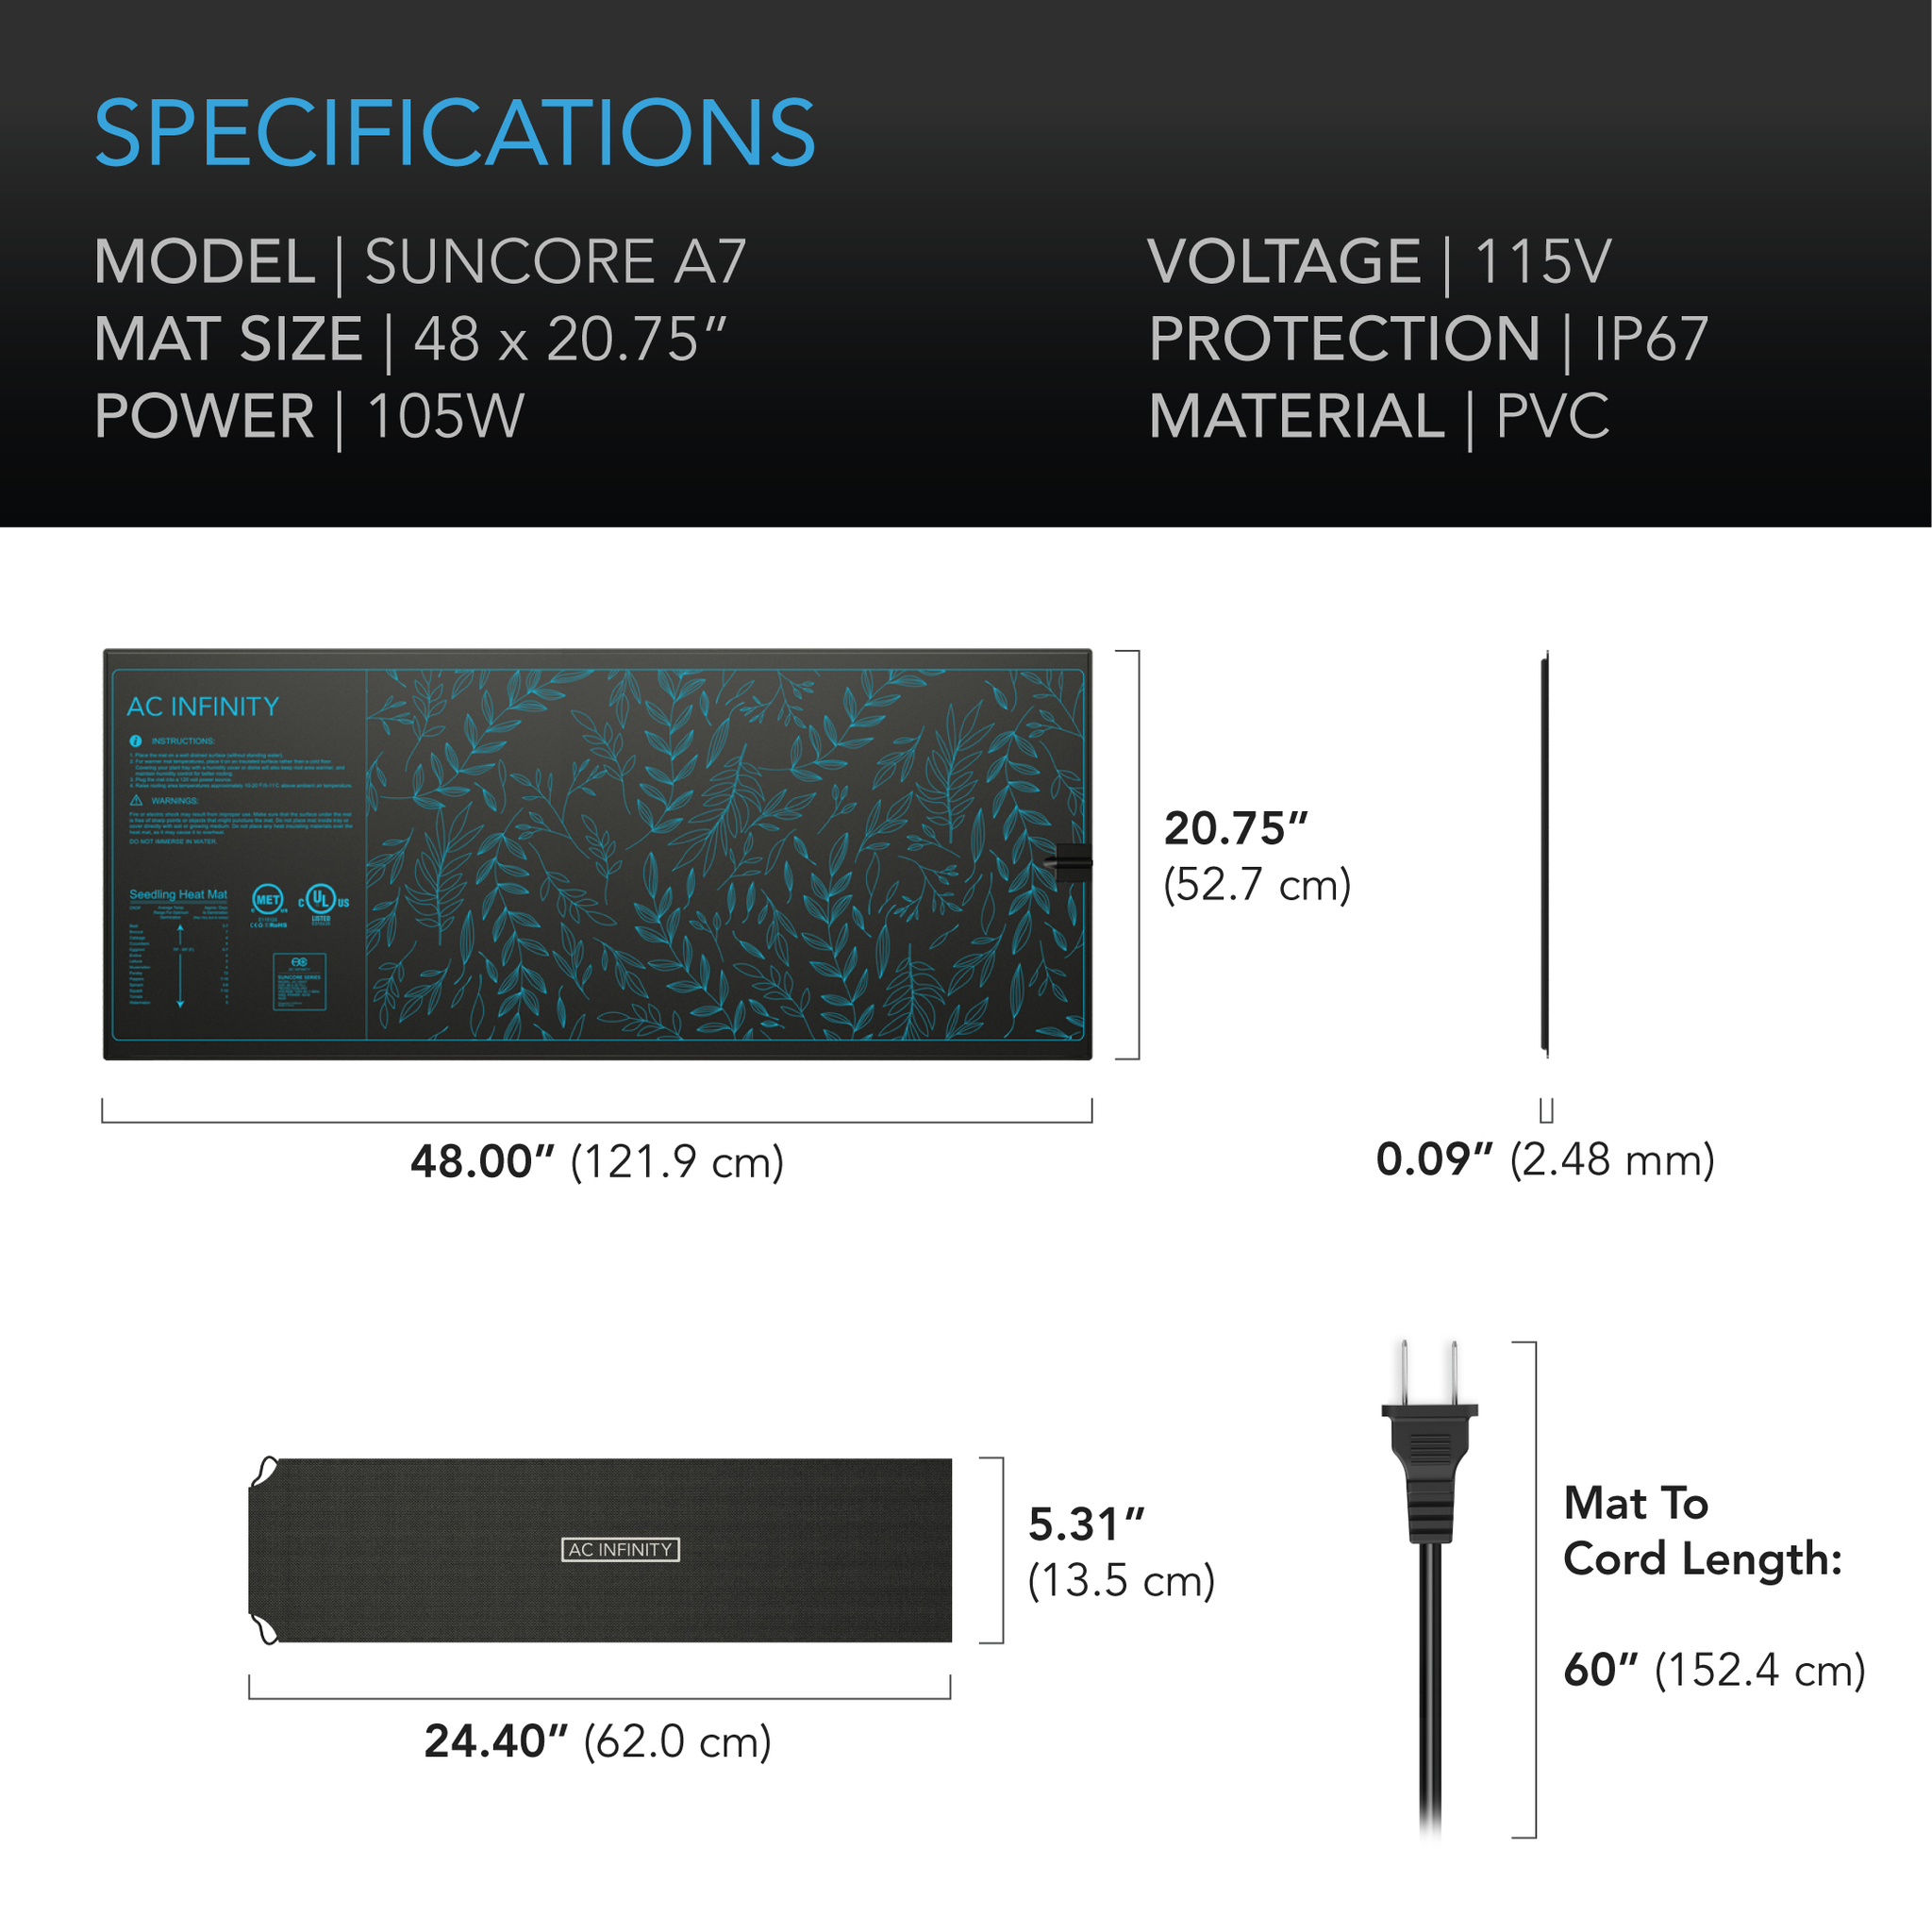 SUNCORE A7 Heat Mat Specifications